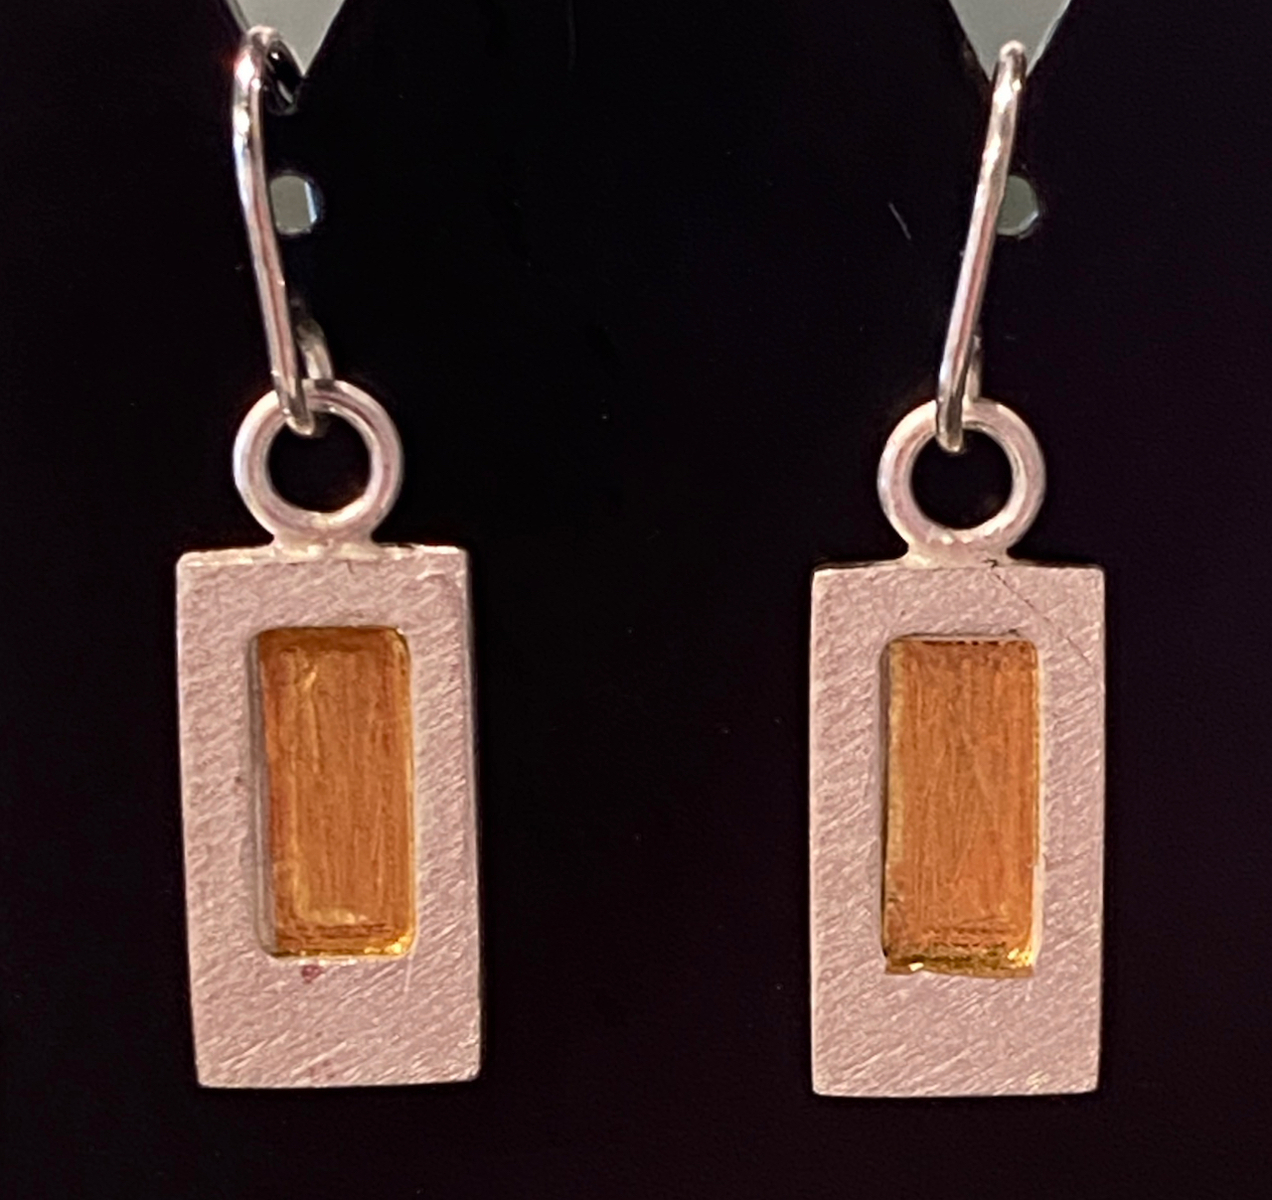 Little Oblongs - earrings - sterling silver, 24ct. gold, Reticulated, Keum Boo